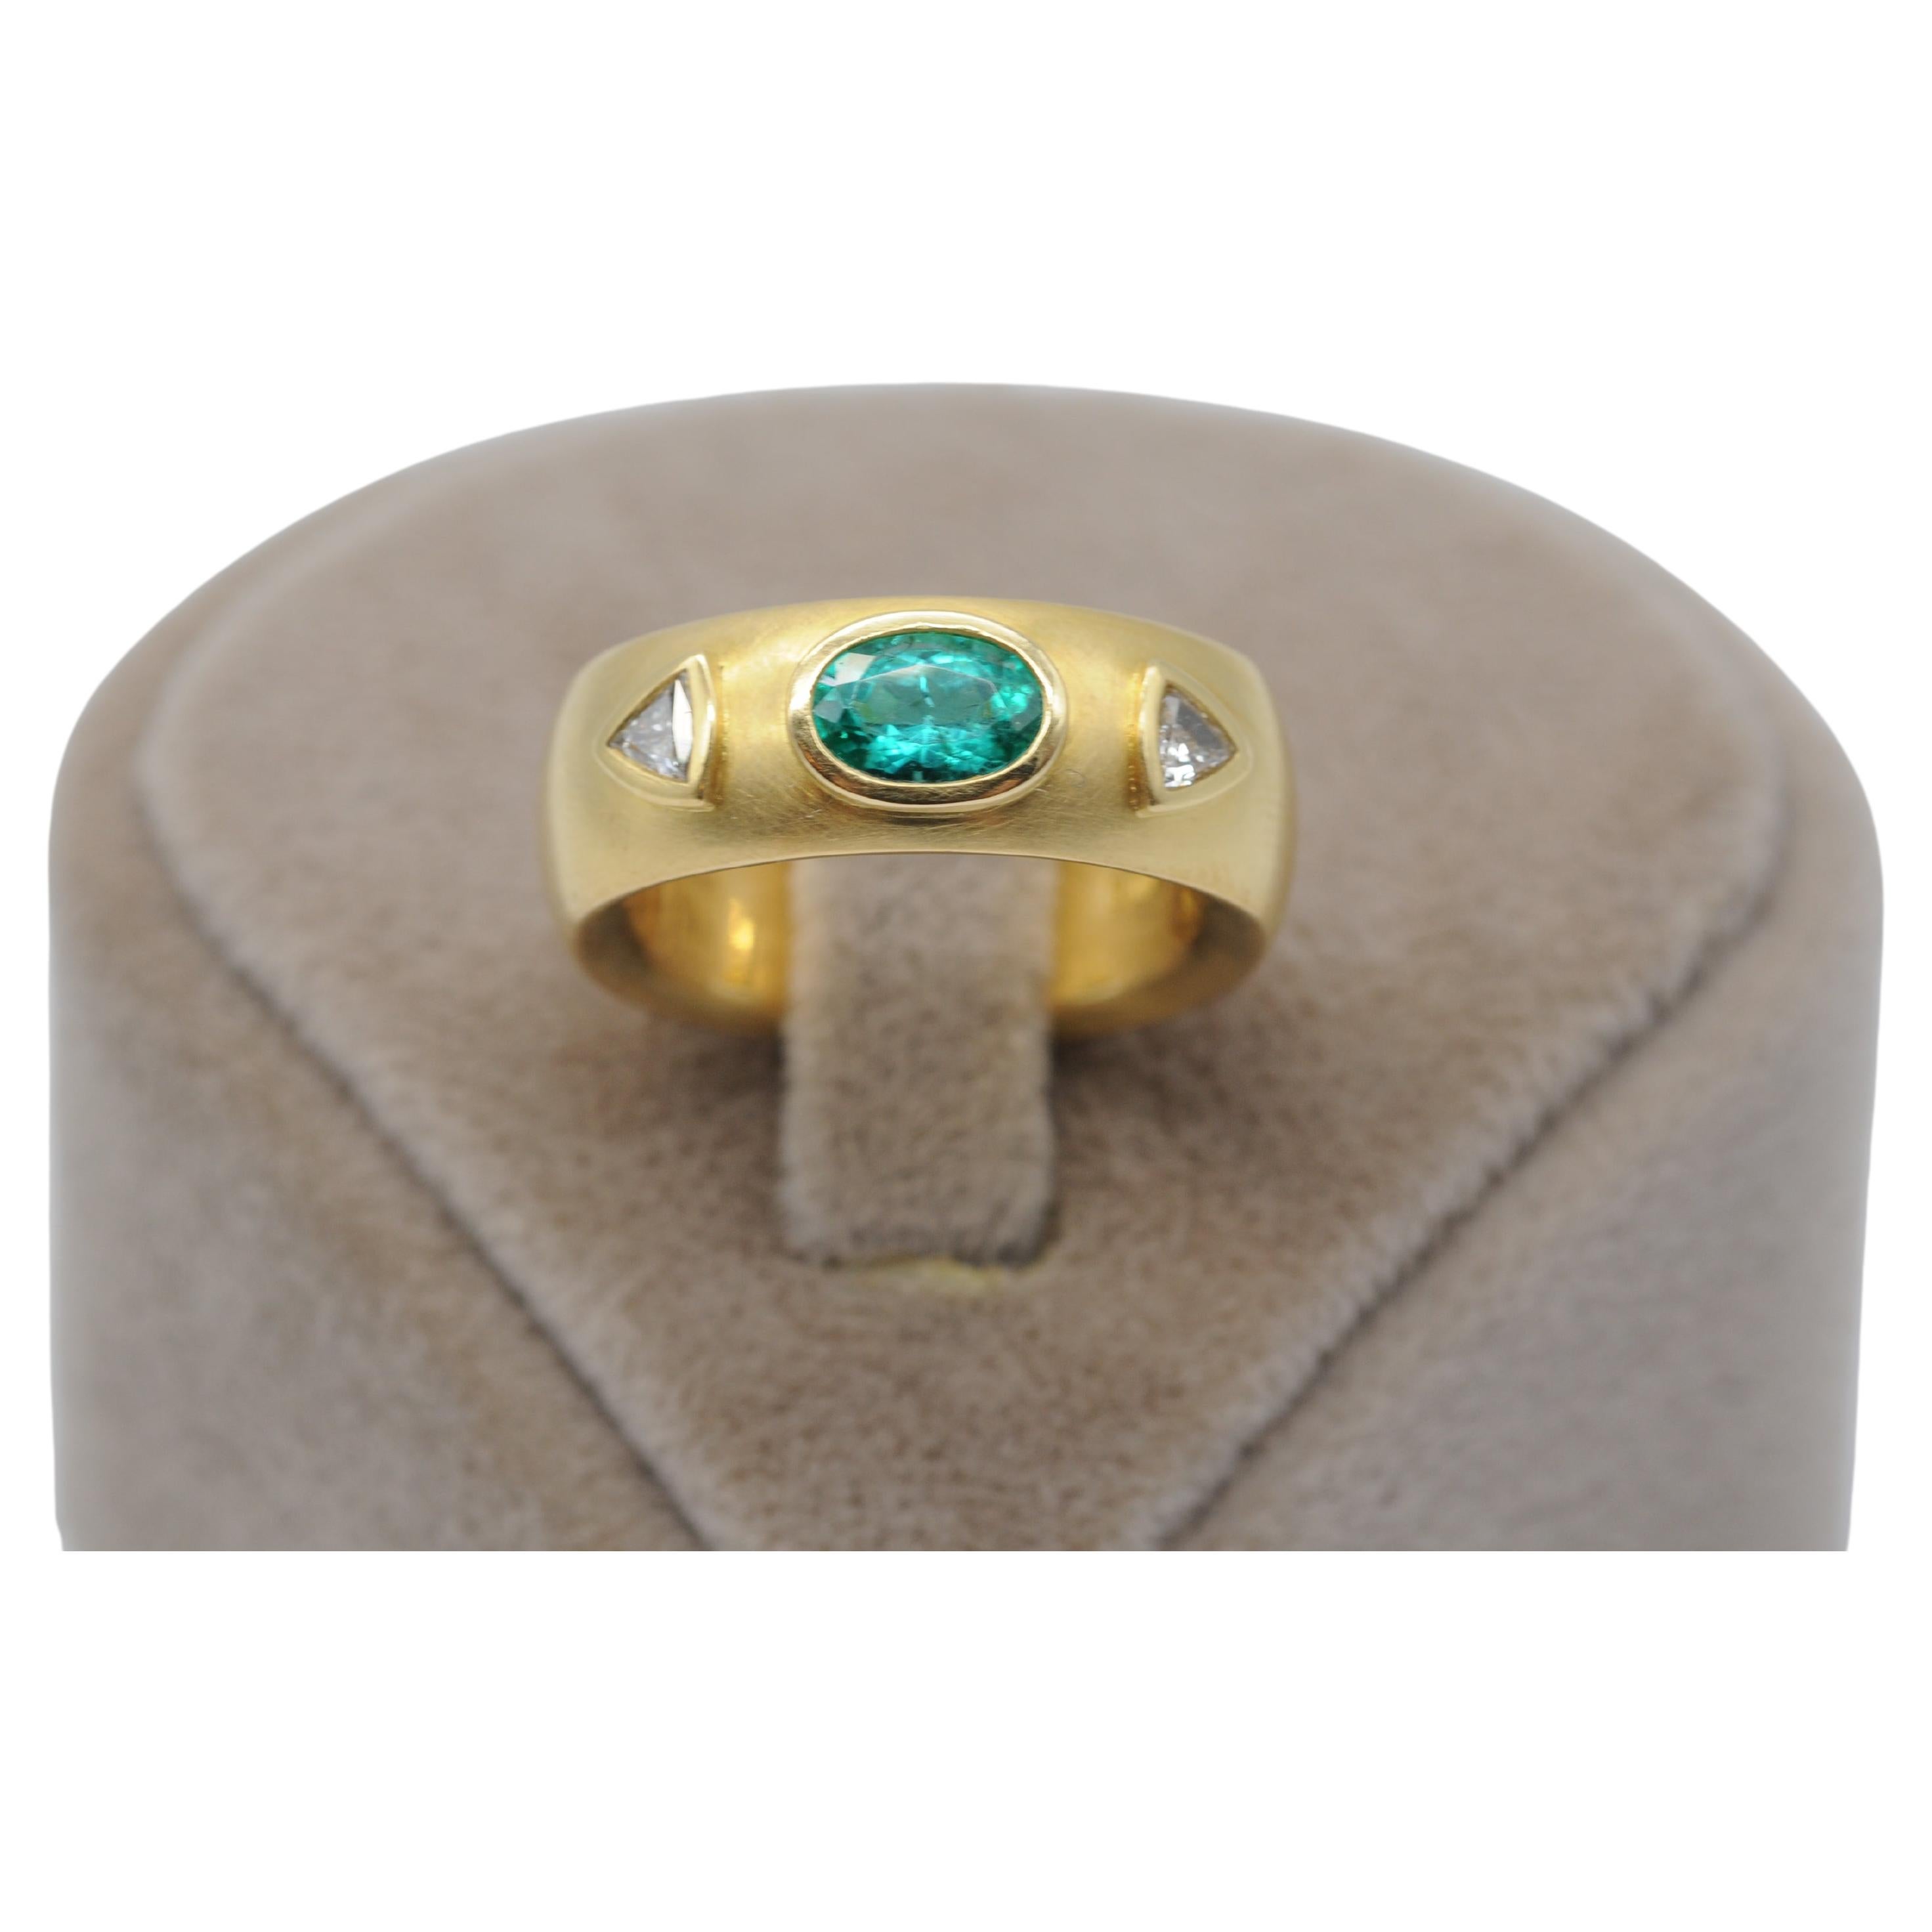 Immerse yourself in the exquisite elegance of this stunning 21.6k (900er) yellow gold ring, a true masterpiece crafted by a skilled old German goldsmith. Adorned with a resplendent oval-cut emerald at its center, flanked by dazzling triangle-cut